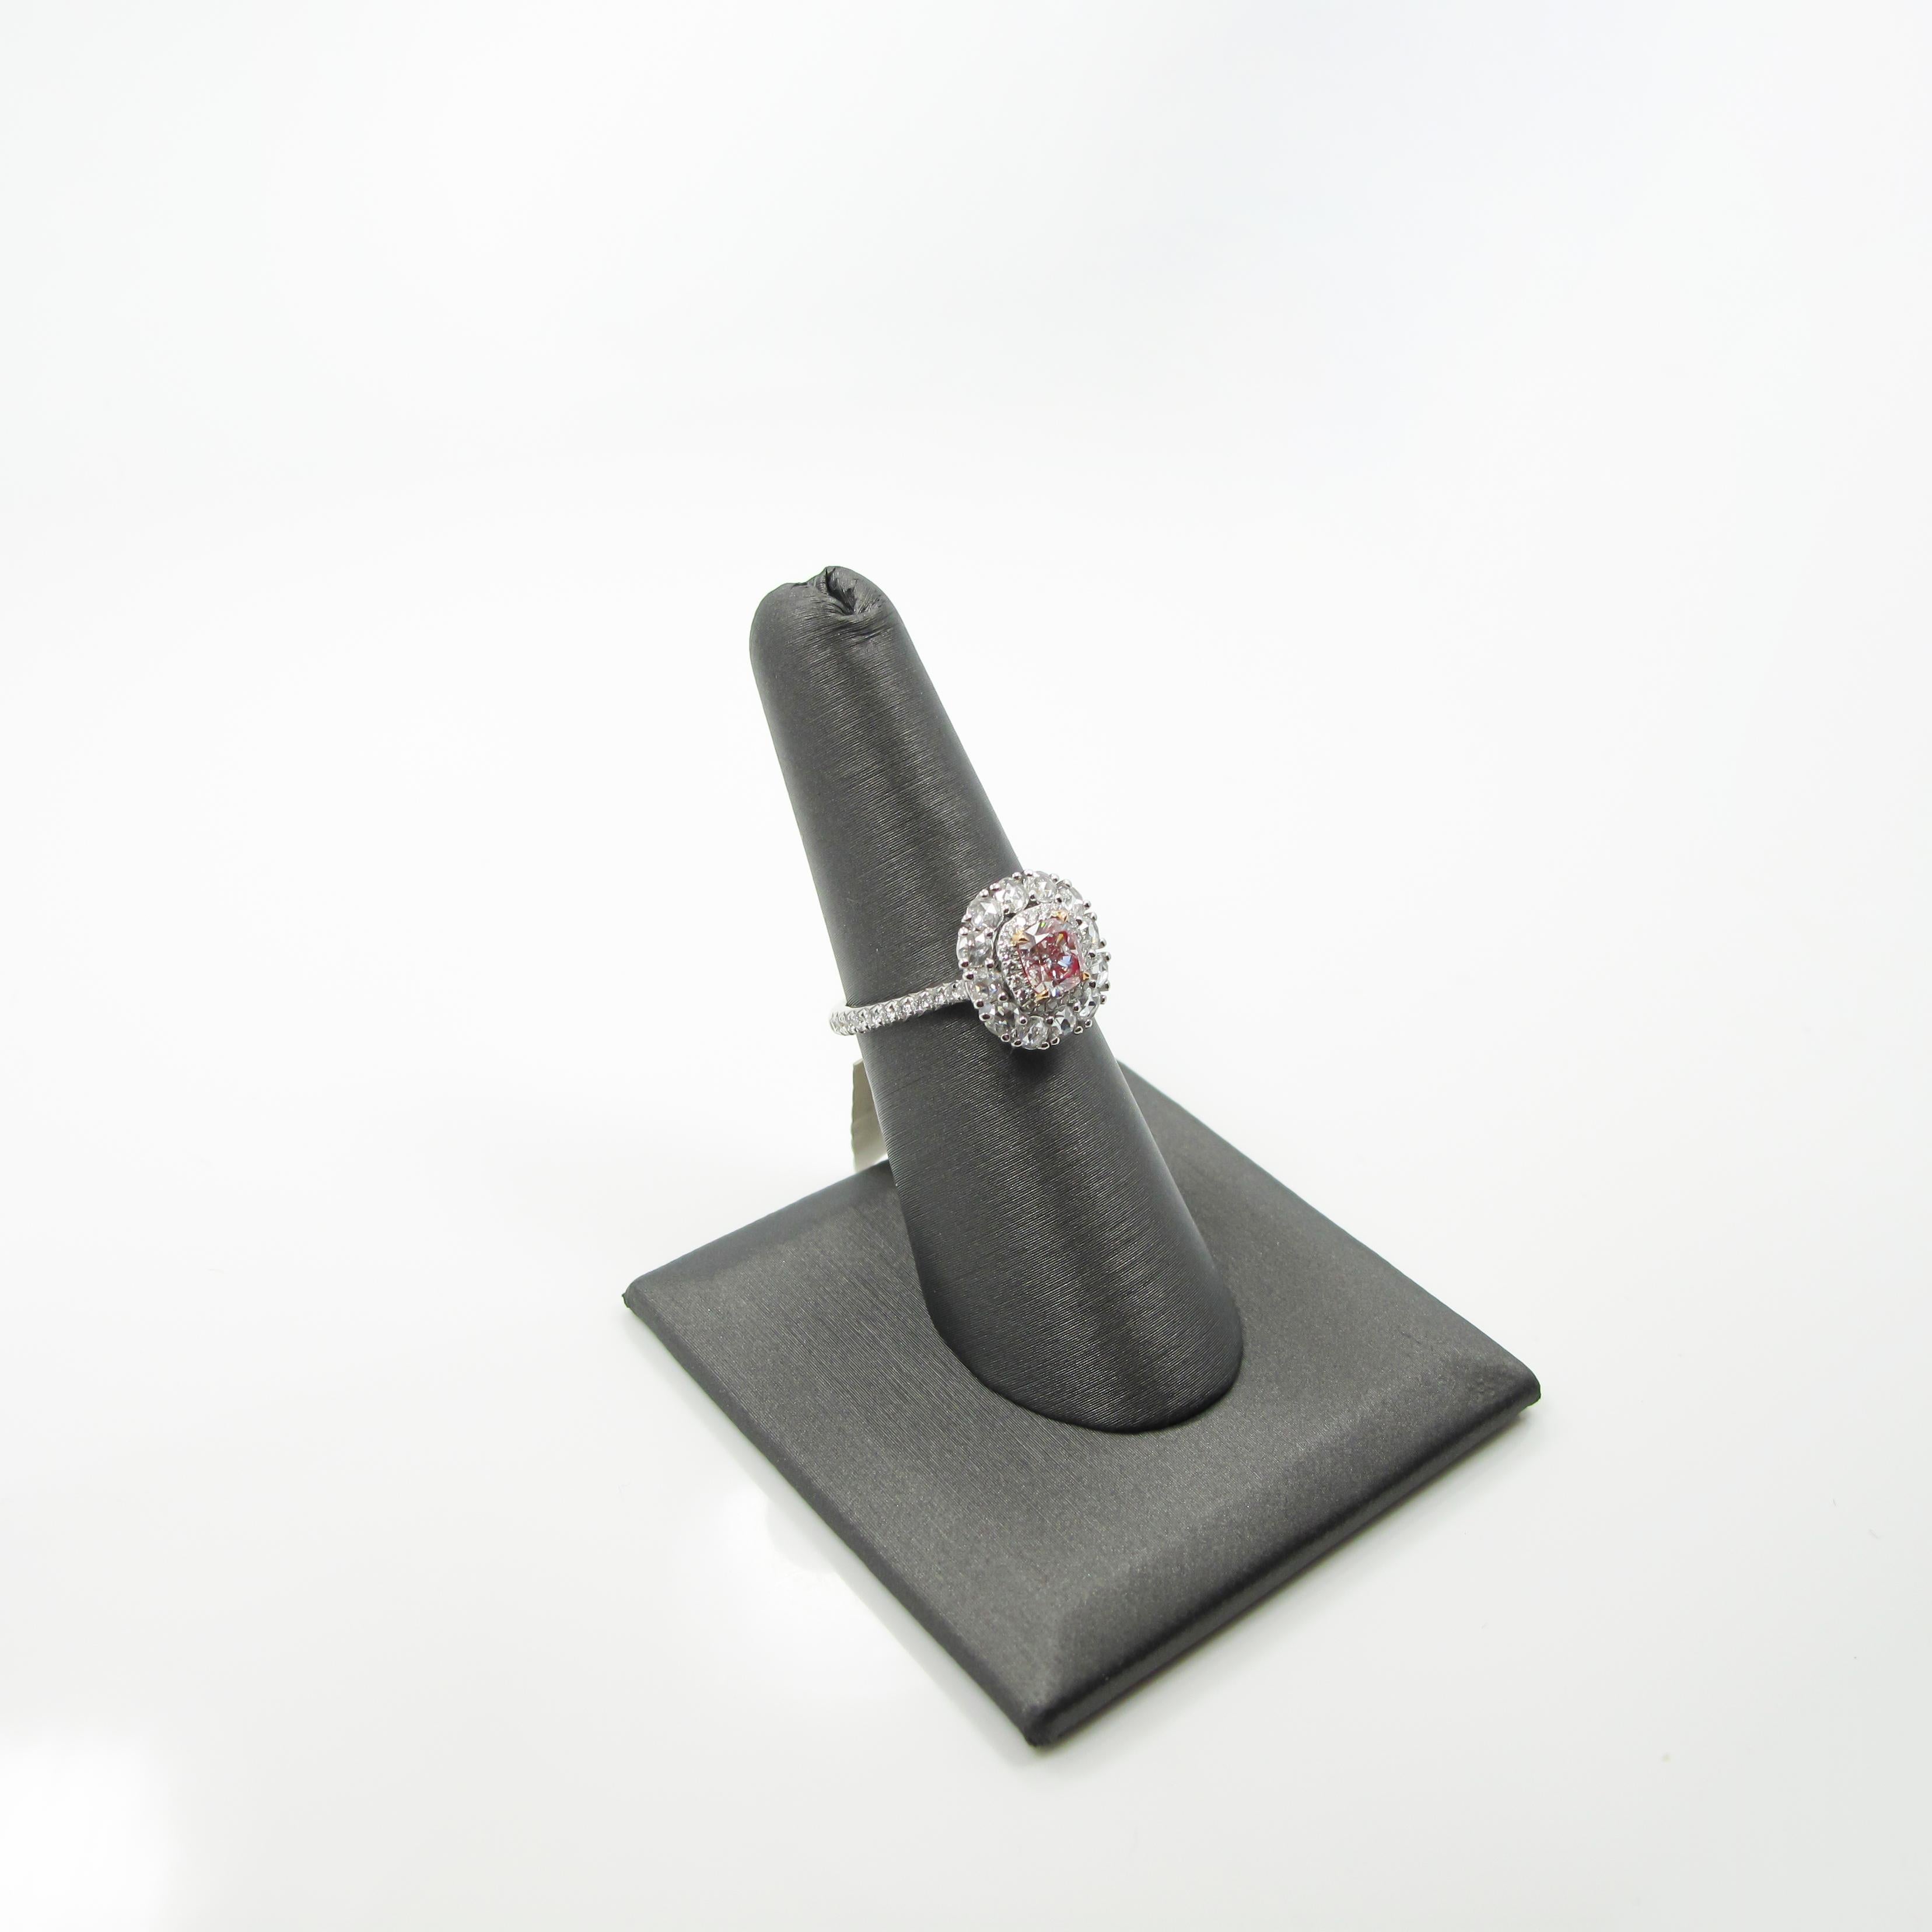 The ring features a 0.71ct. very light pink (but very nice color in person!) cushion modified brilliant diamond measuring approximately 5.21x4.95x3.42mm and accompanied by GIA certificate #5191685045.  The cushion is set in an 18k white gold basket